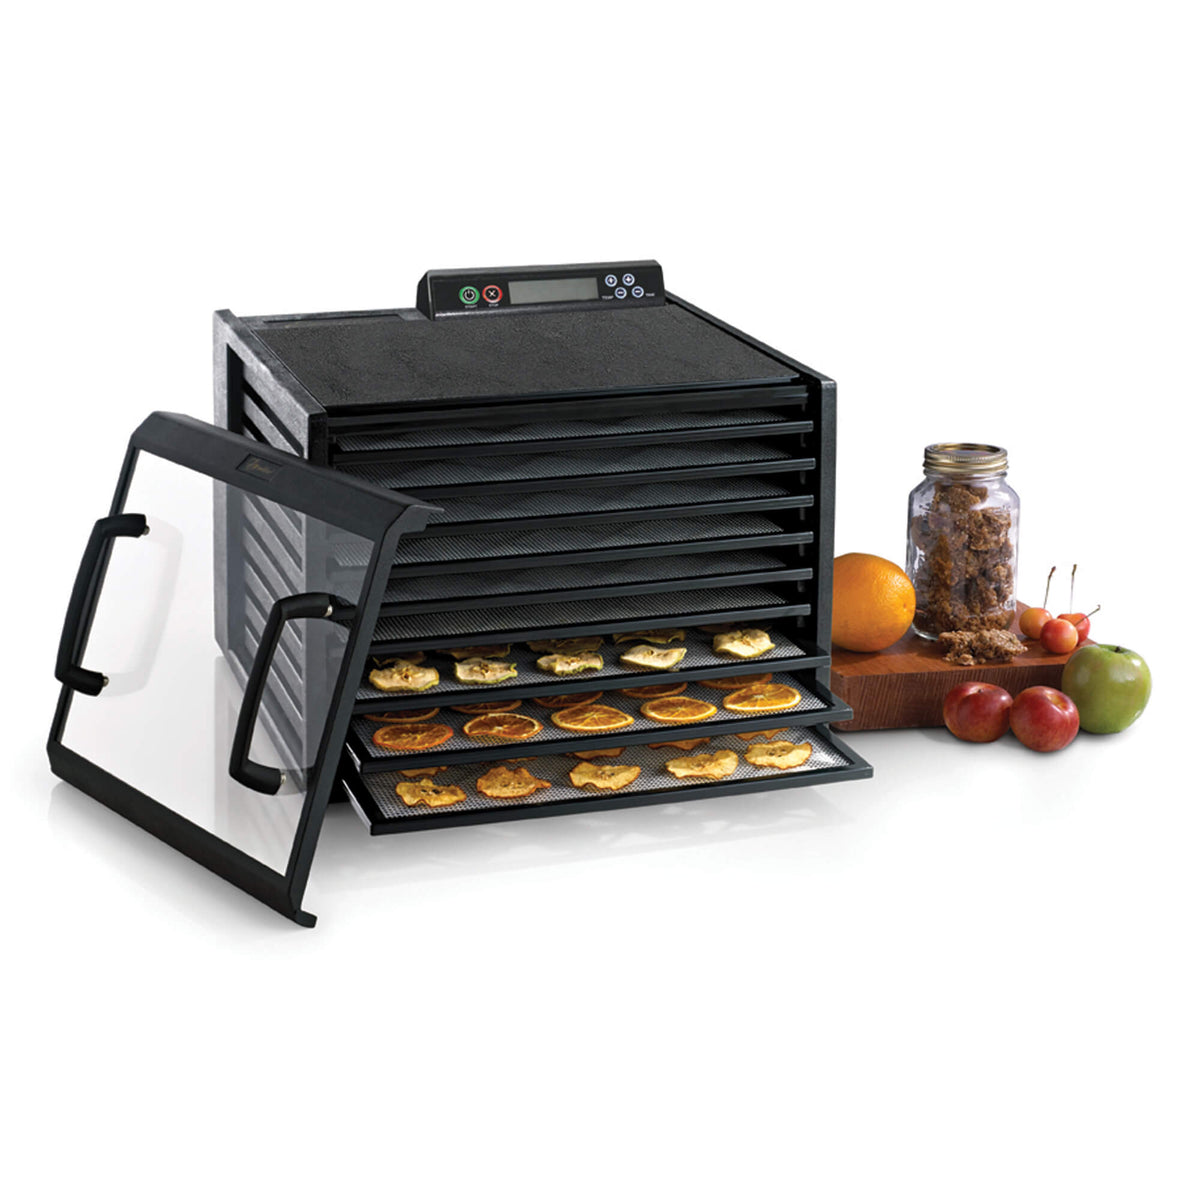 Excalibur 4948CDB 9 tray digital dehydrator with clear door propped to the side and food on the trays.